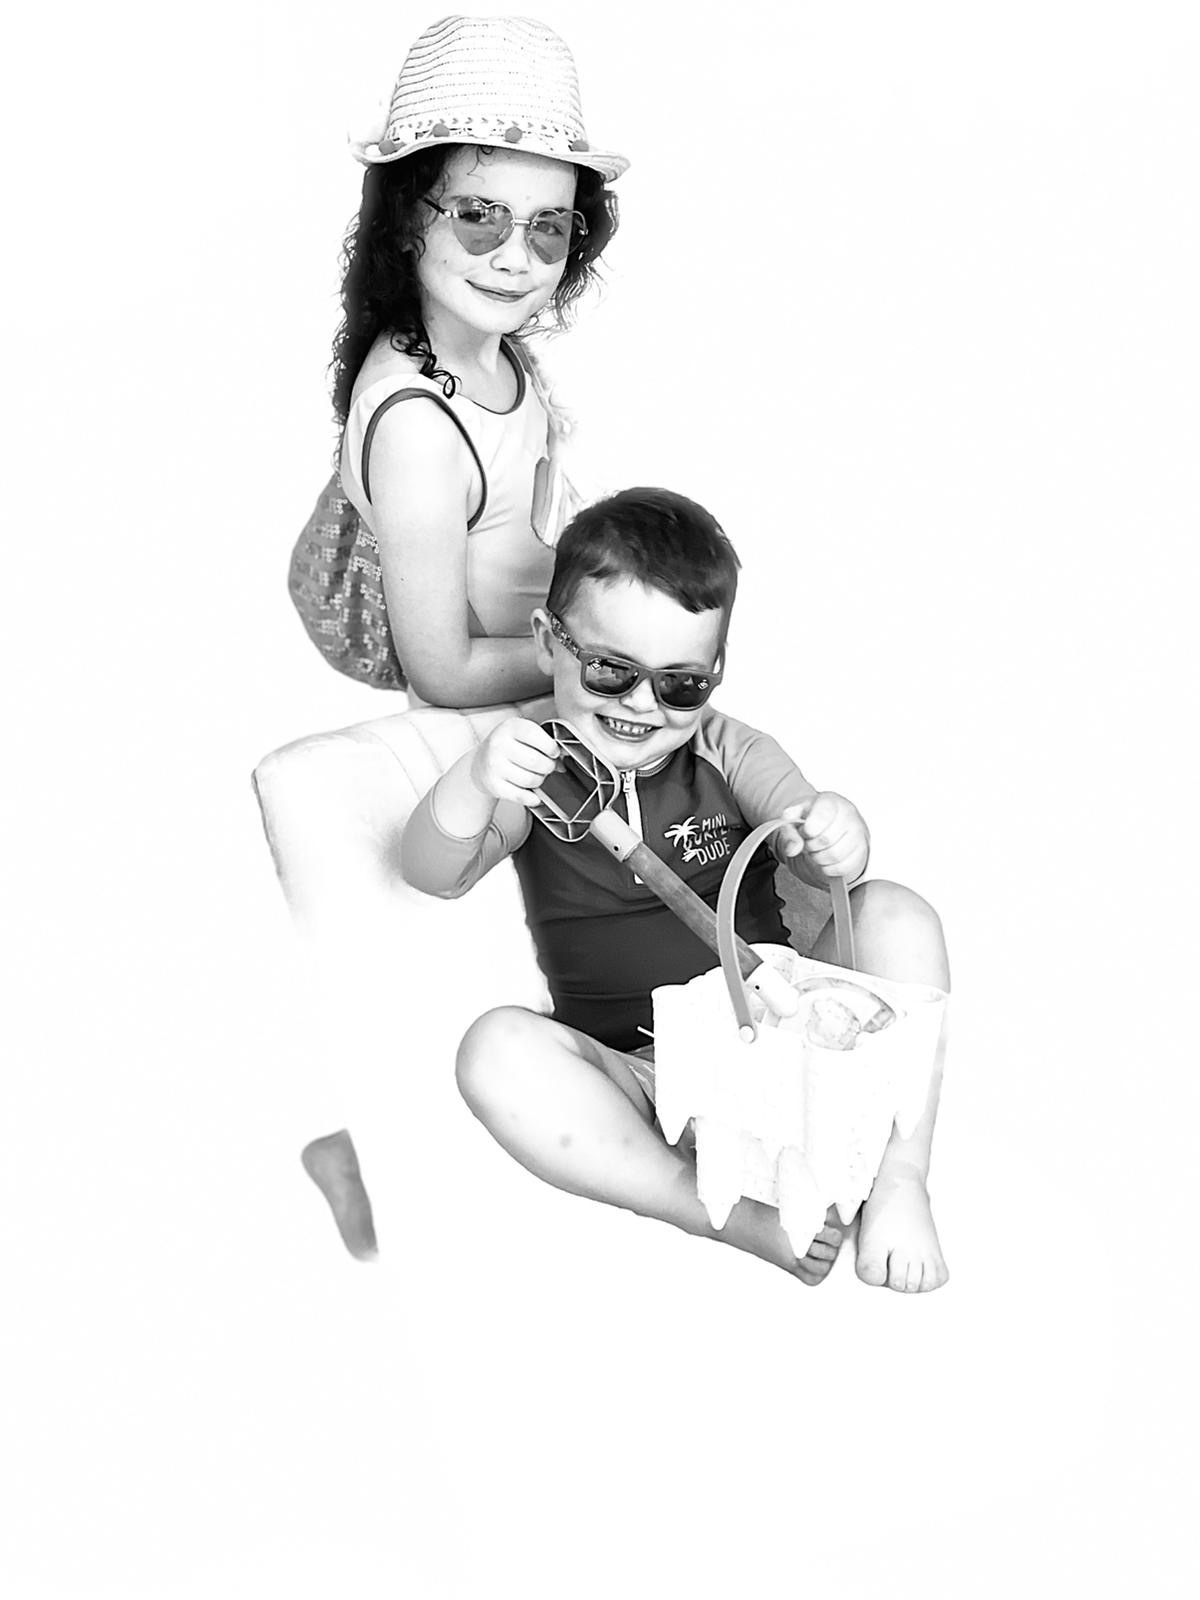 Ciara's submission to the Great British Photography Challenge shows her children, Ellie and Donovan, in beach gear in black and white.